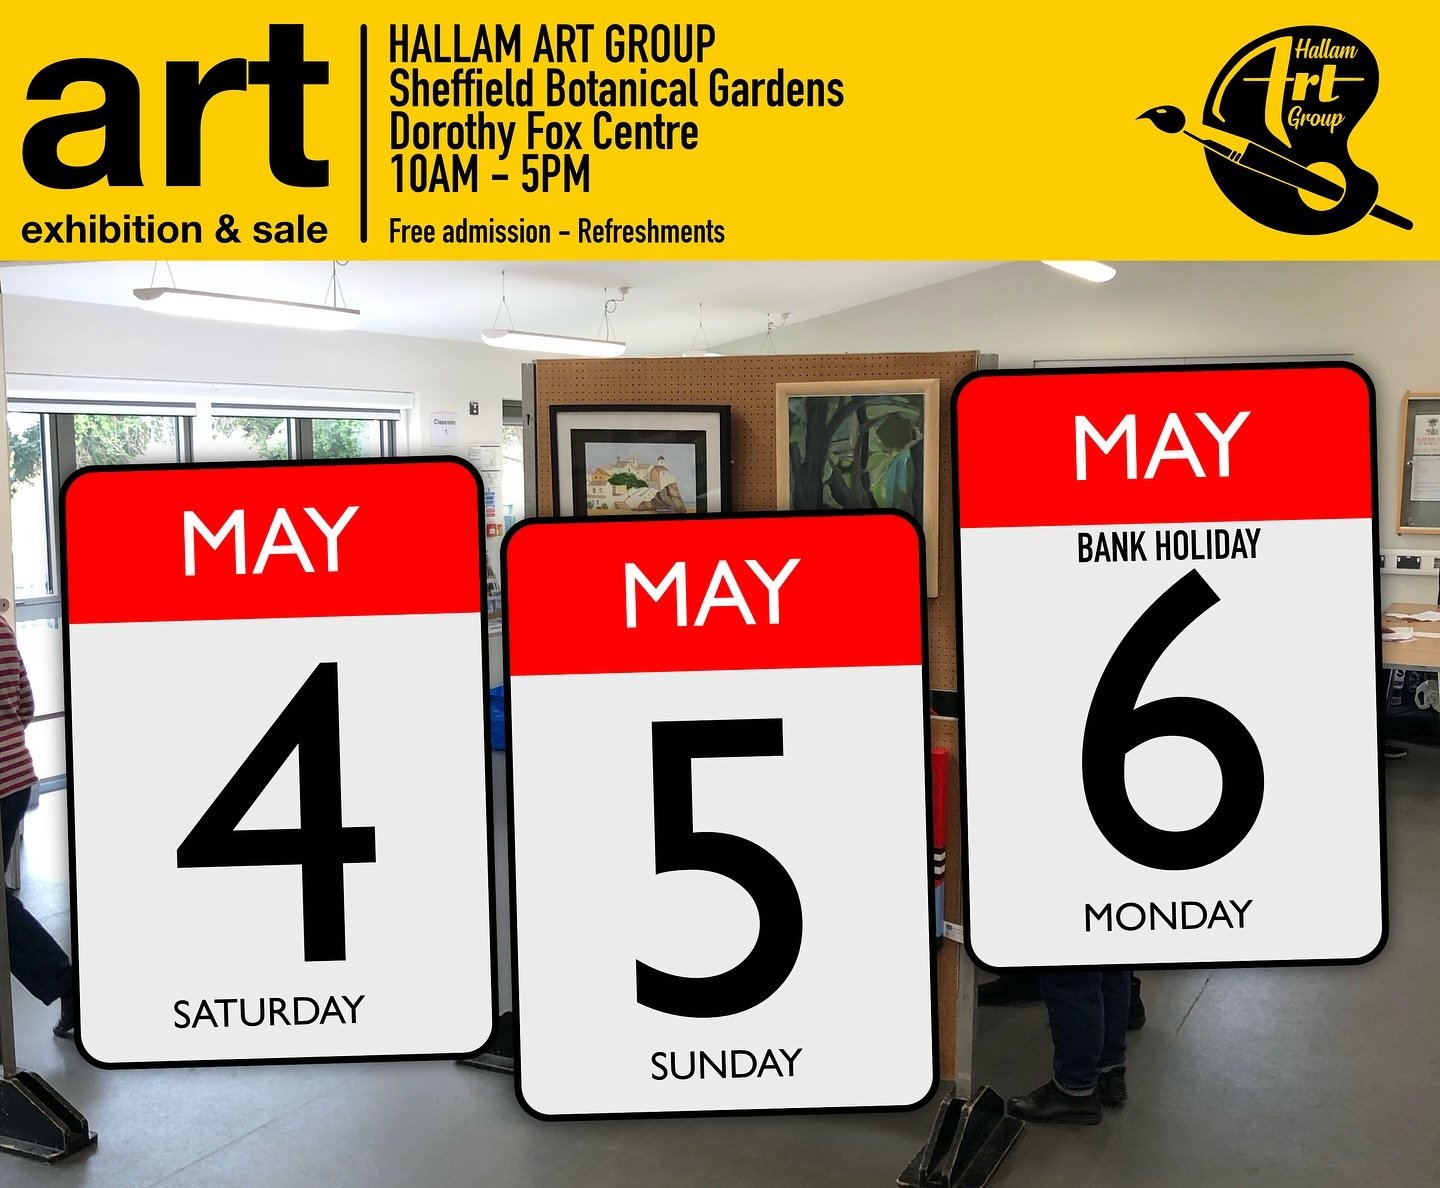 This Saturday, Hallam Art Group holds its annual spring exhibition and sale of original art.  Come along to see new paintings from our members. Including @kerseygerry @phillockwood2173 Isabel Blincow @glynwilliamsartist and many others. 
#sheffieldar